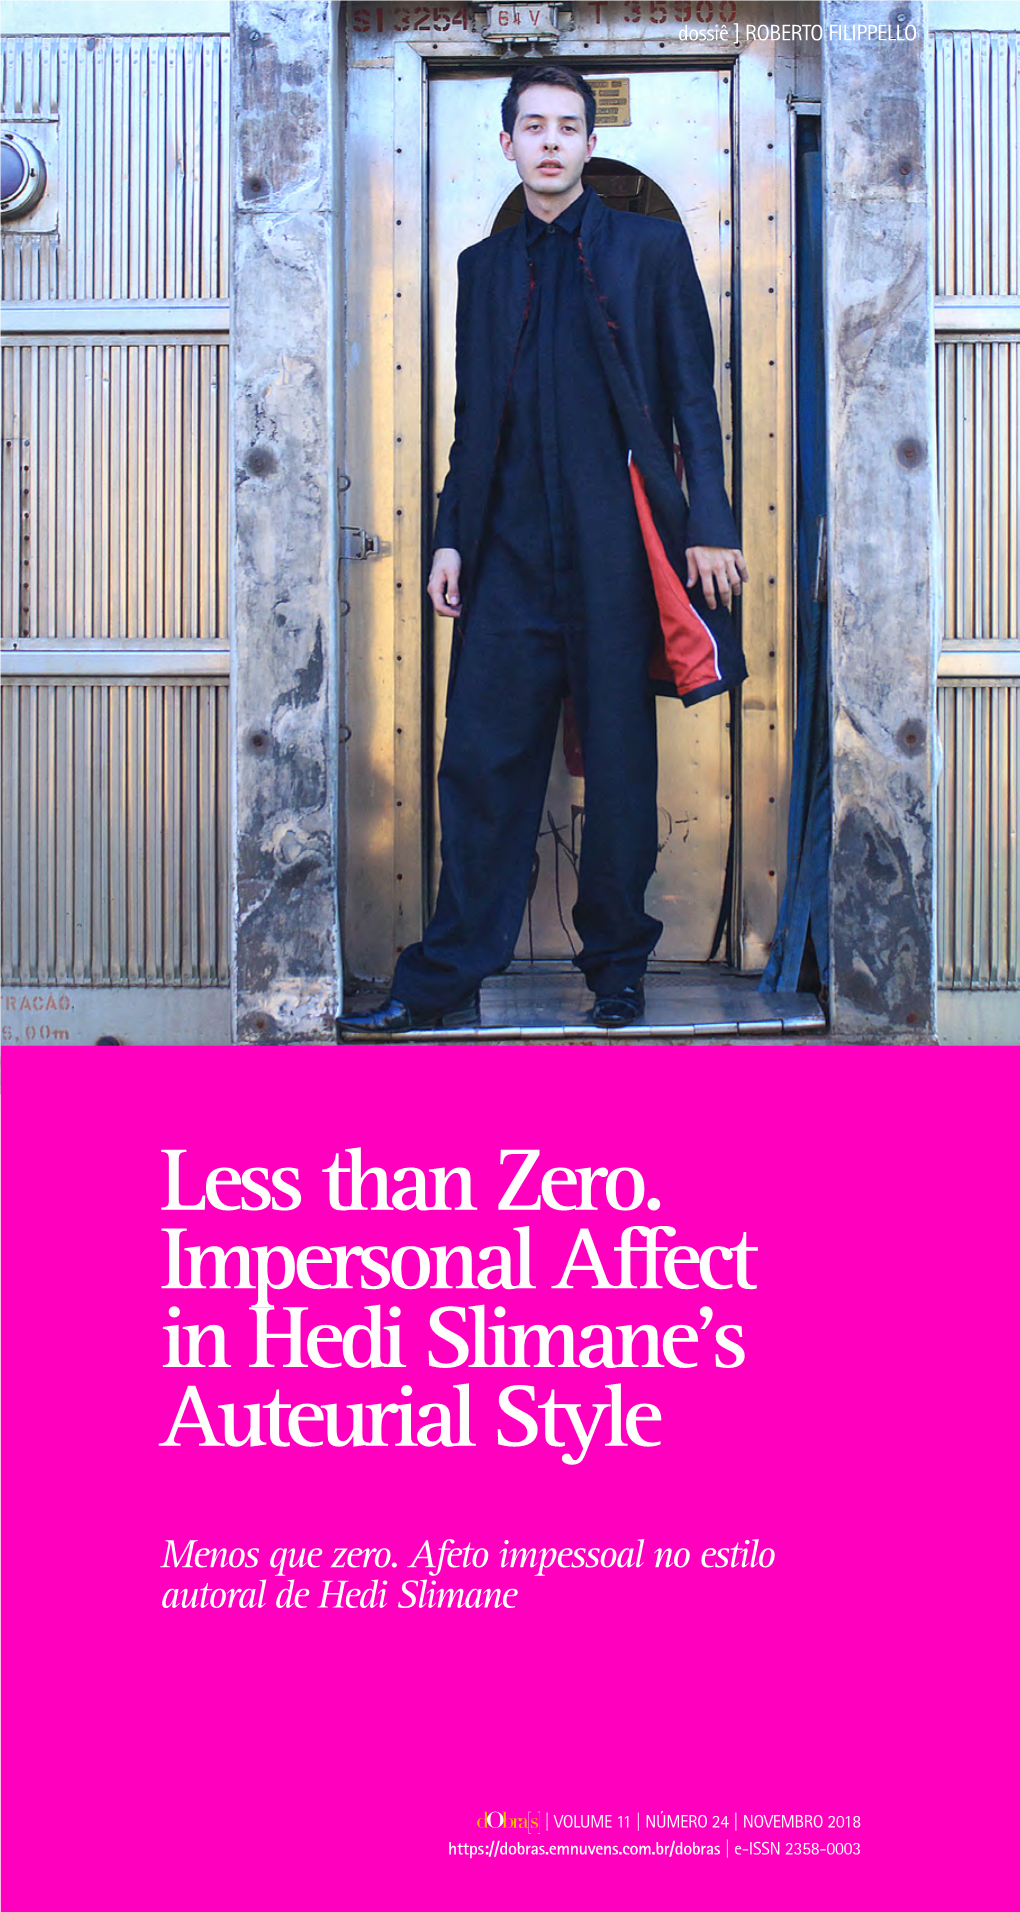 Less Than Zero. Impersonal Affect in Hedi Slimane's Auteurial Style